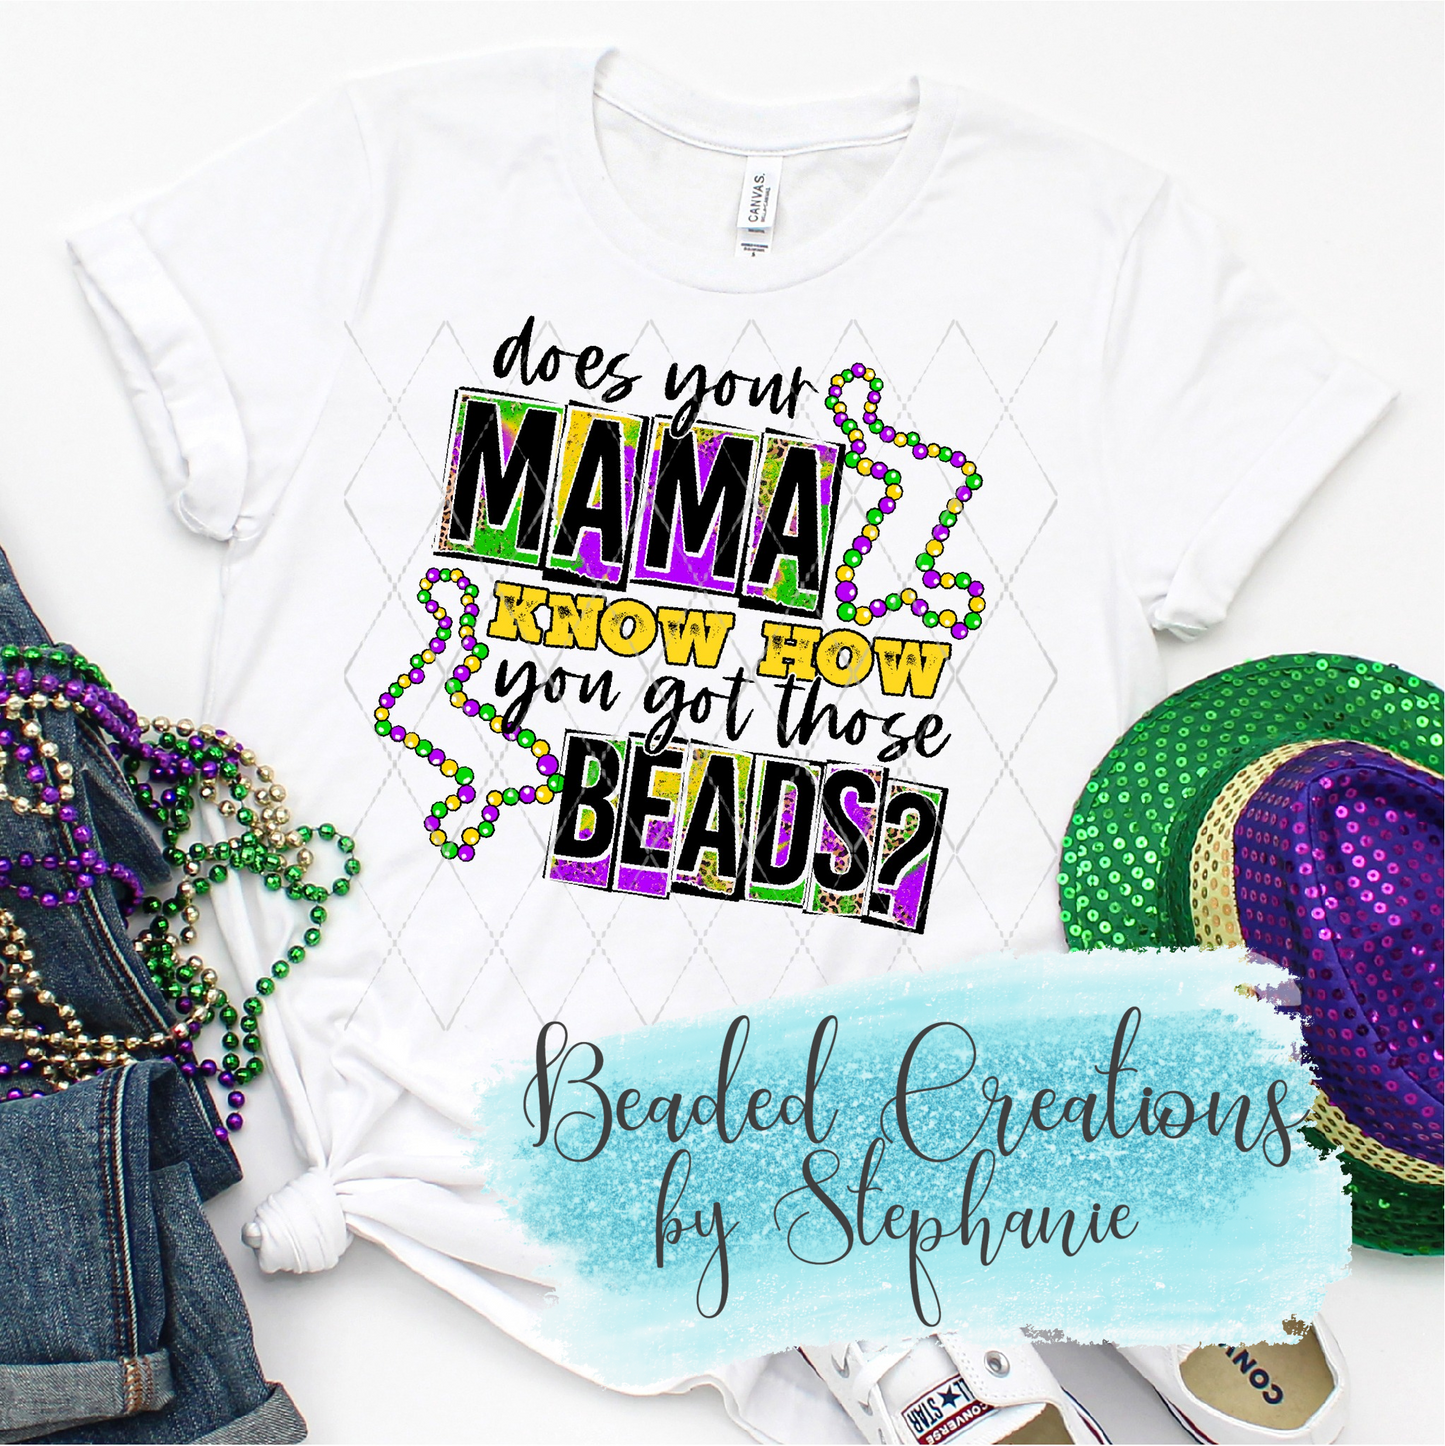 Does Your mama know what you did for those beads?